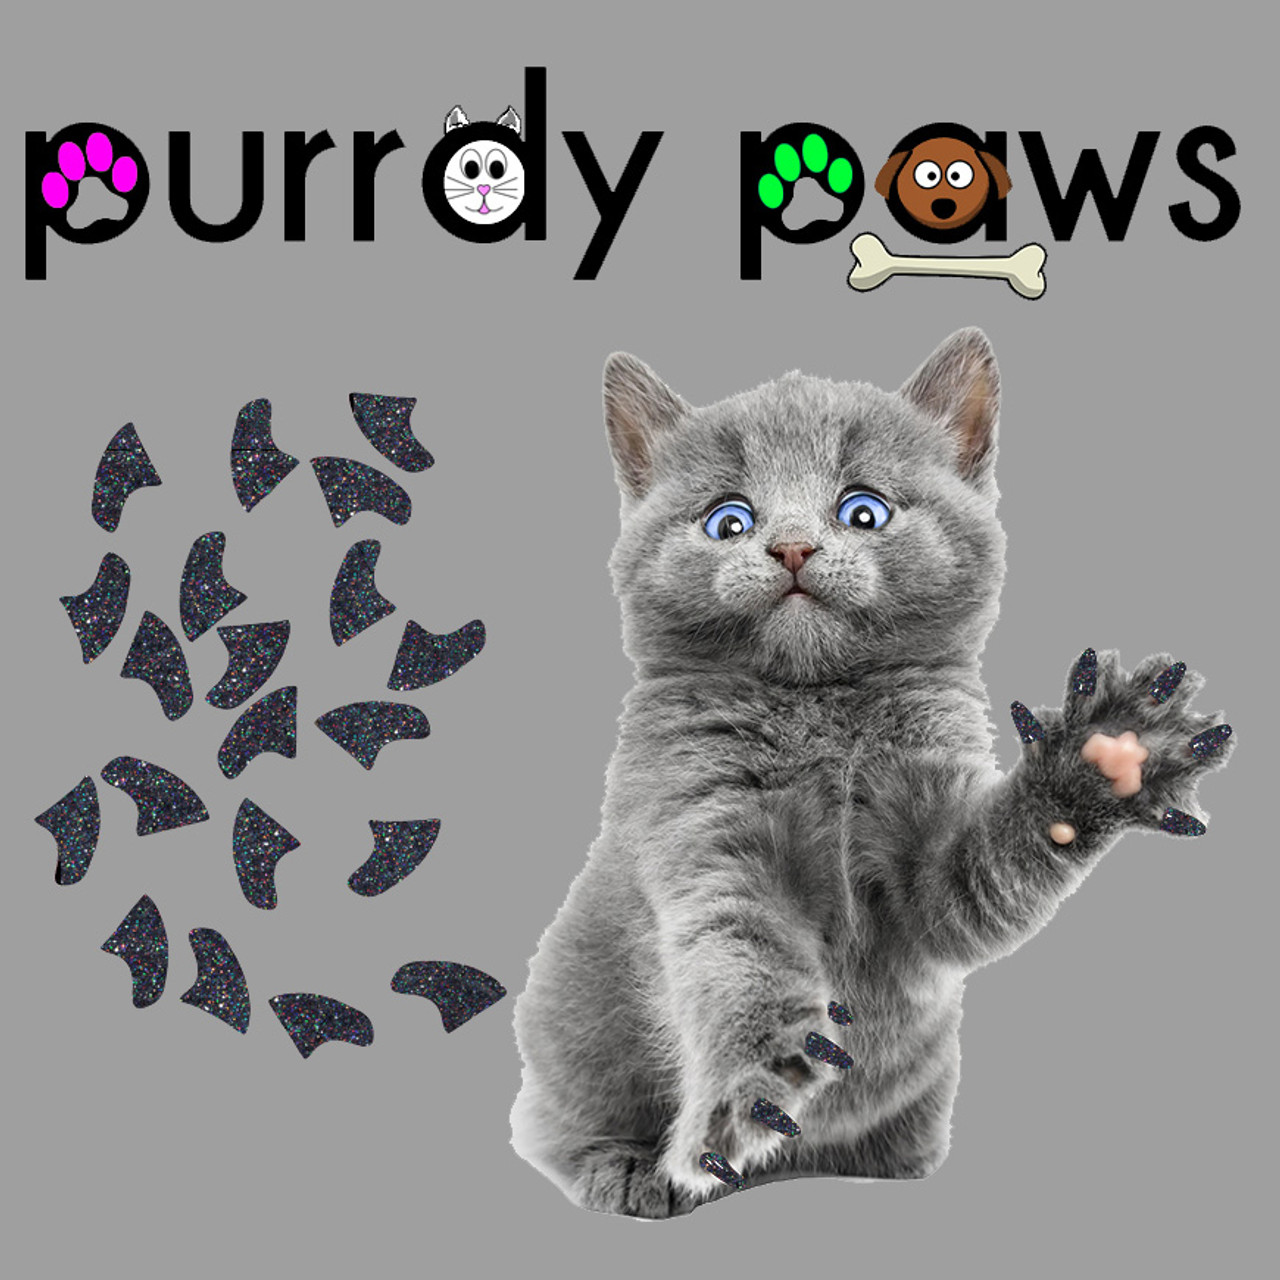 6 Month Supply - Purrdy Paws Seafoam Glitter Soft Nail Caps for Kittens  Claws - Extra Adhesives - Walmart.com